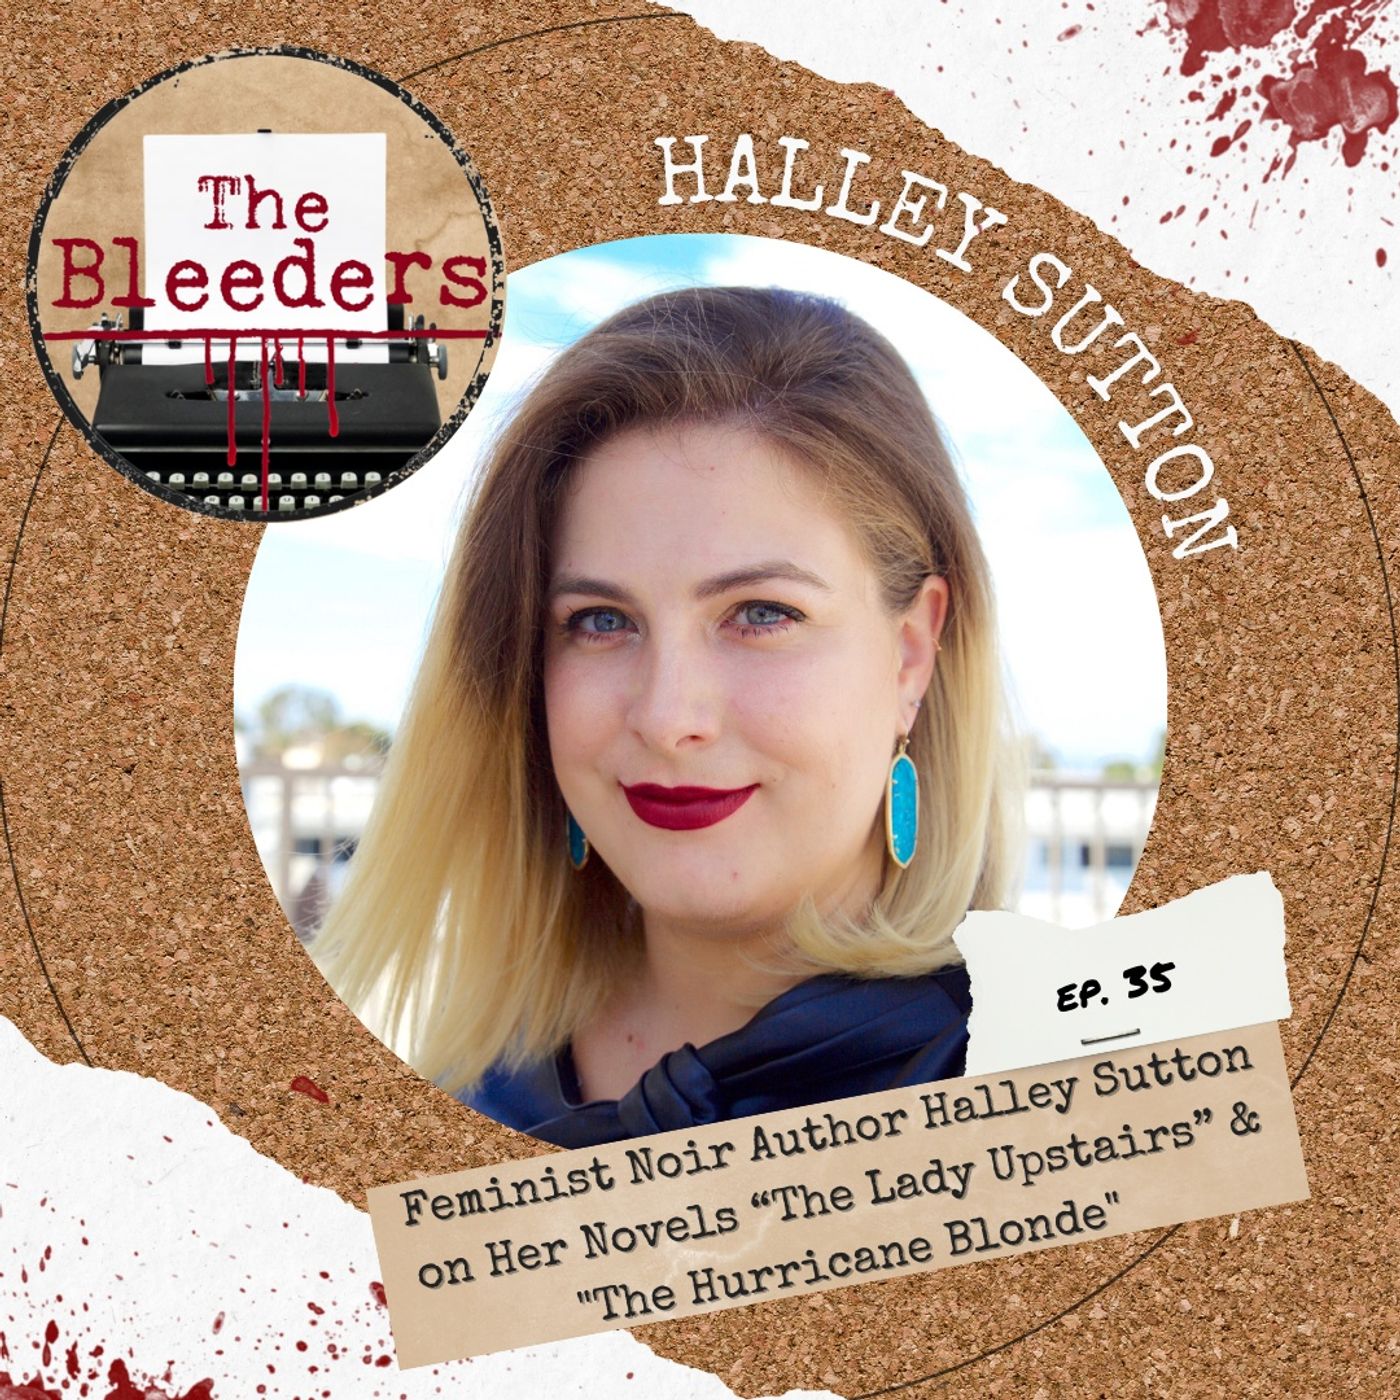 Feminist Noir Author Halley Sutton on Her Novels “The Lady Upstairs” & ”The Hurricane Blonde”